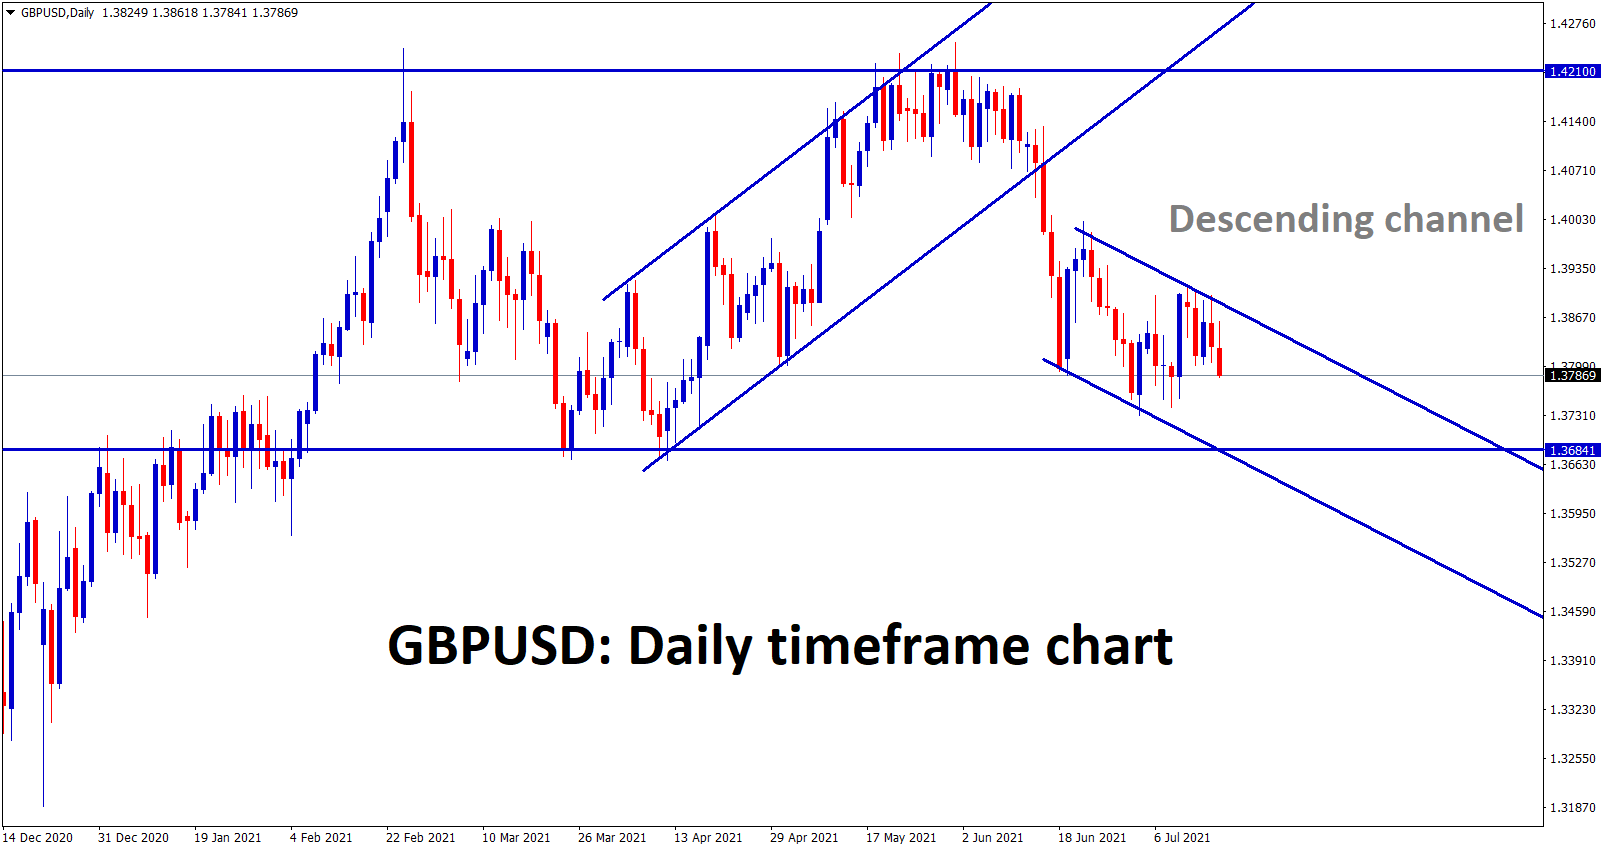 GBPUSD is moving in a descending channel right now which will lead the market to the support zone